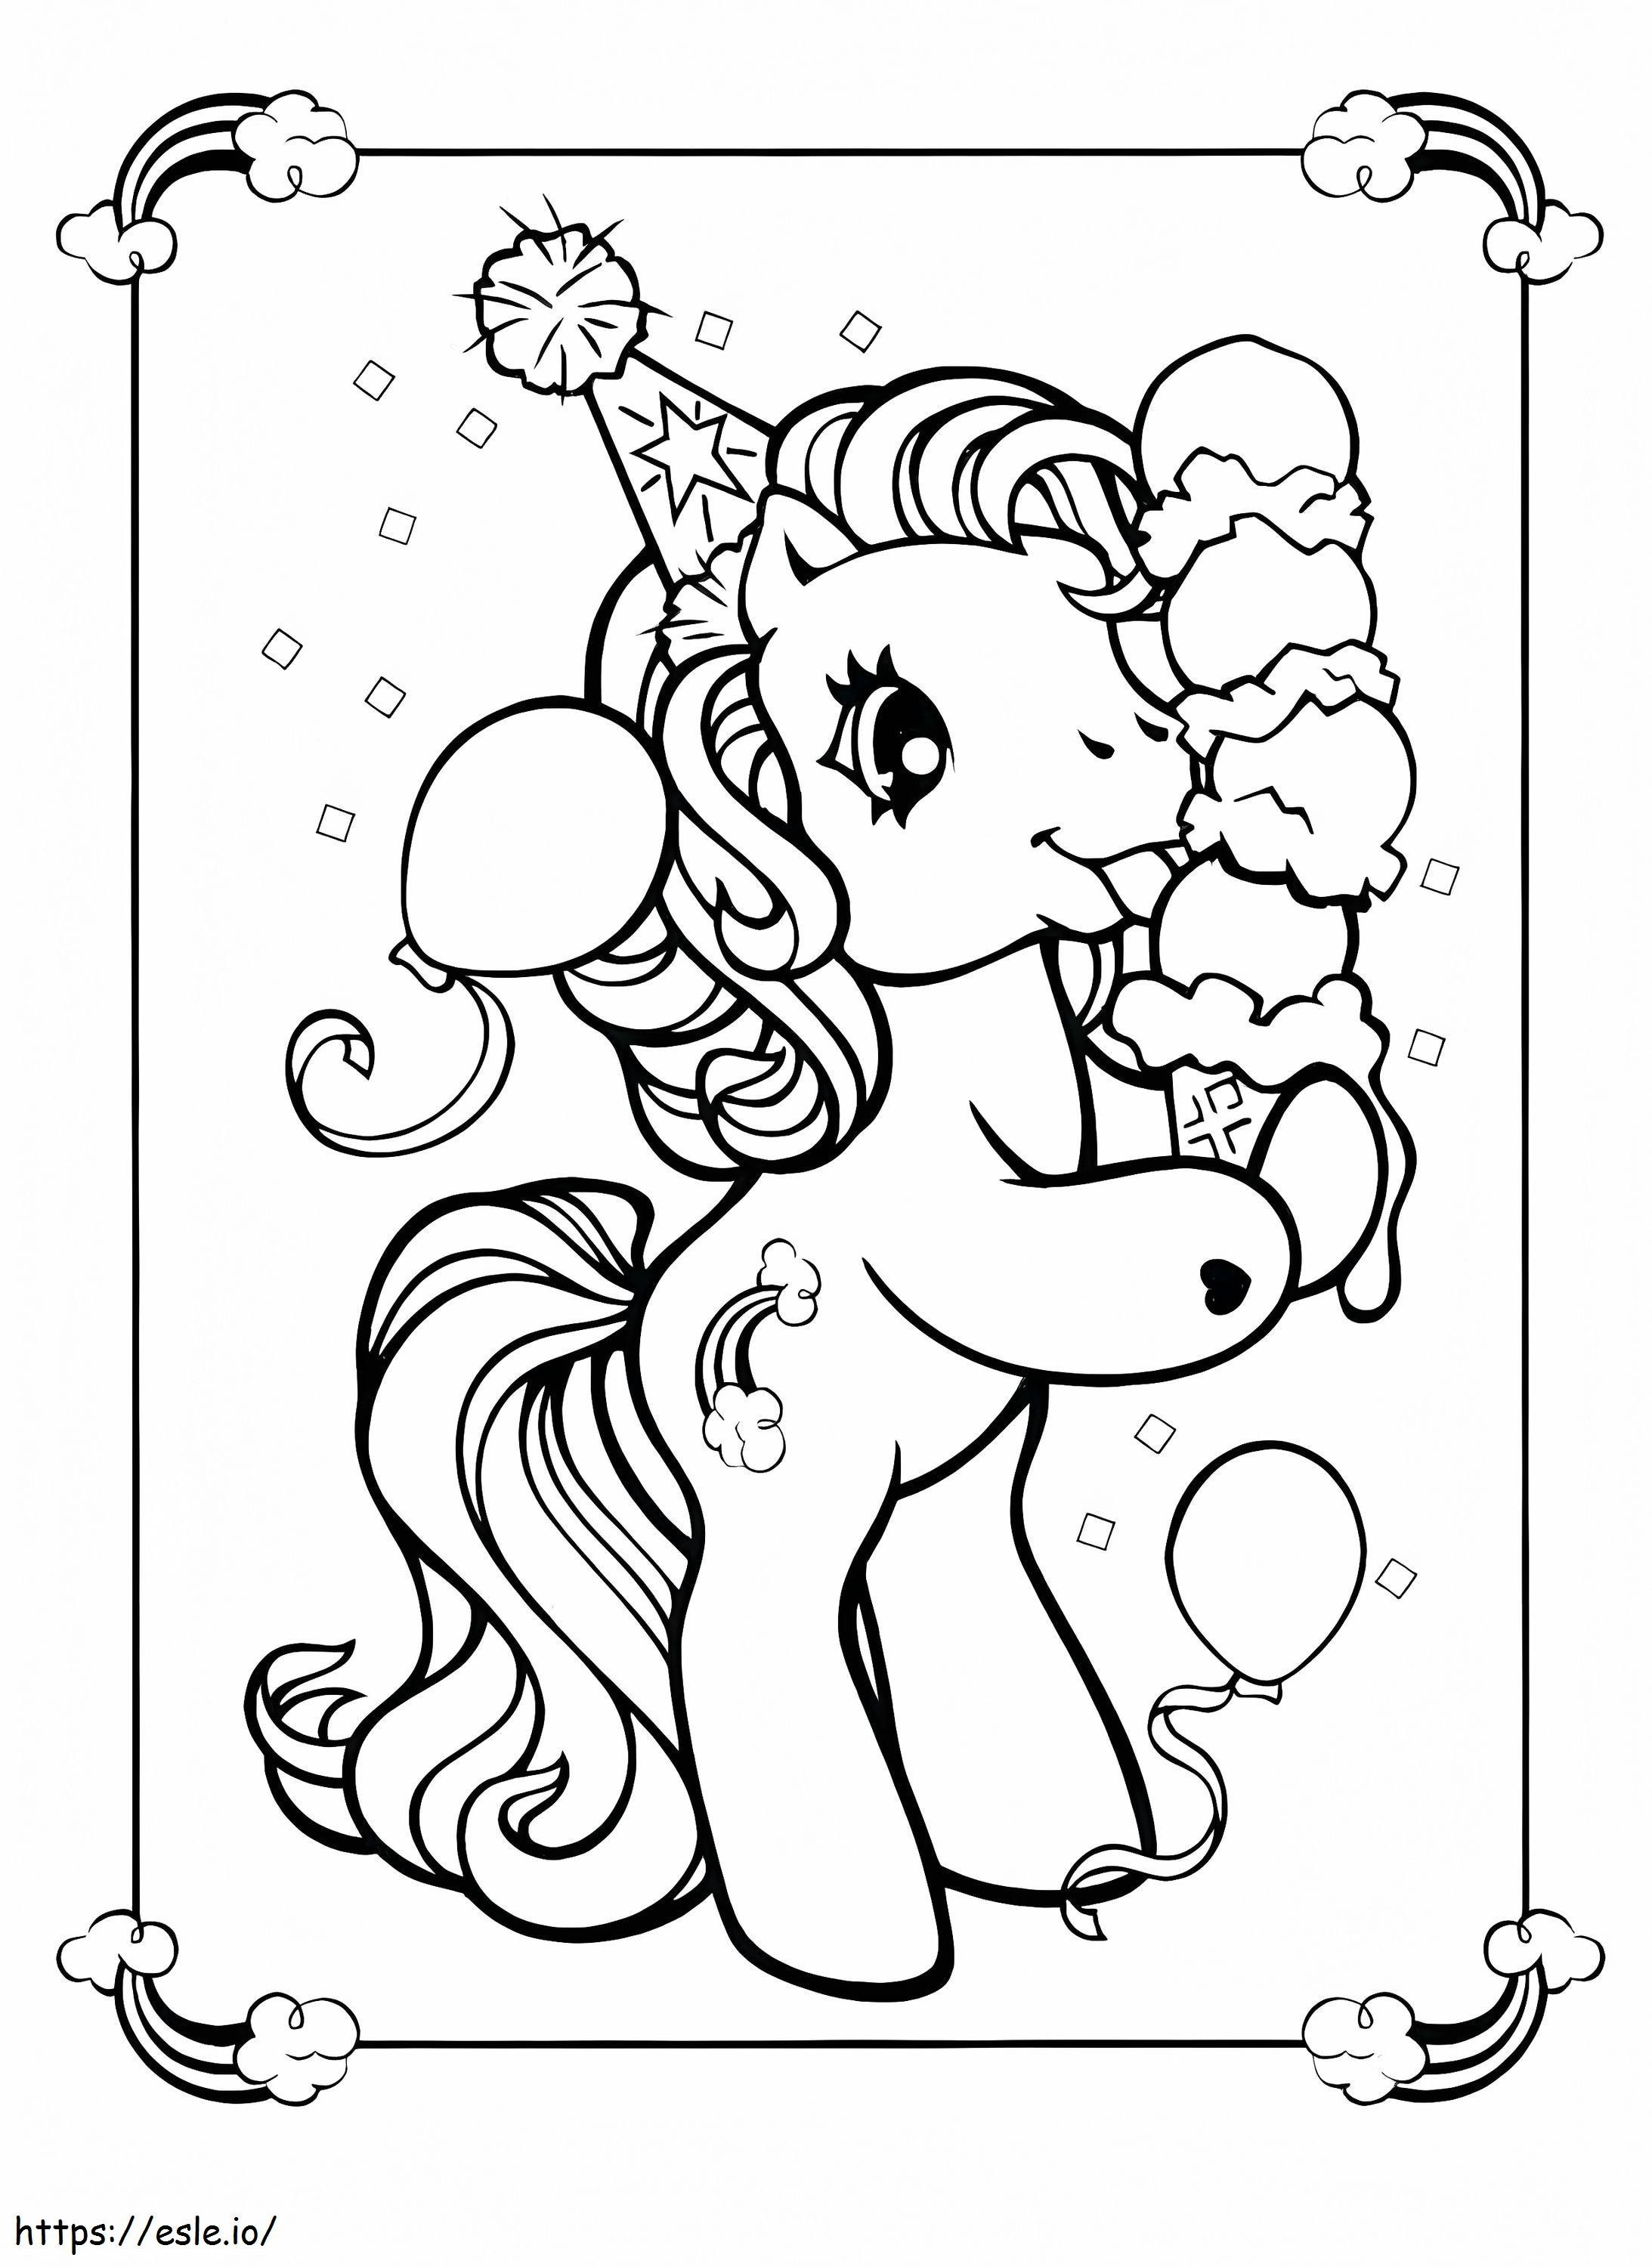 Unicorn Eating Ice Cream coloring page